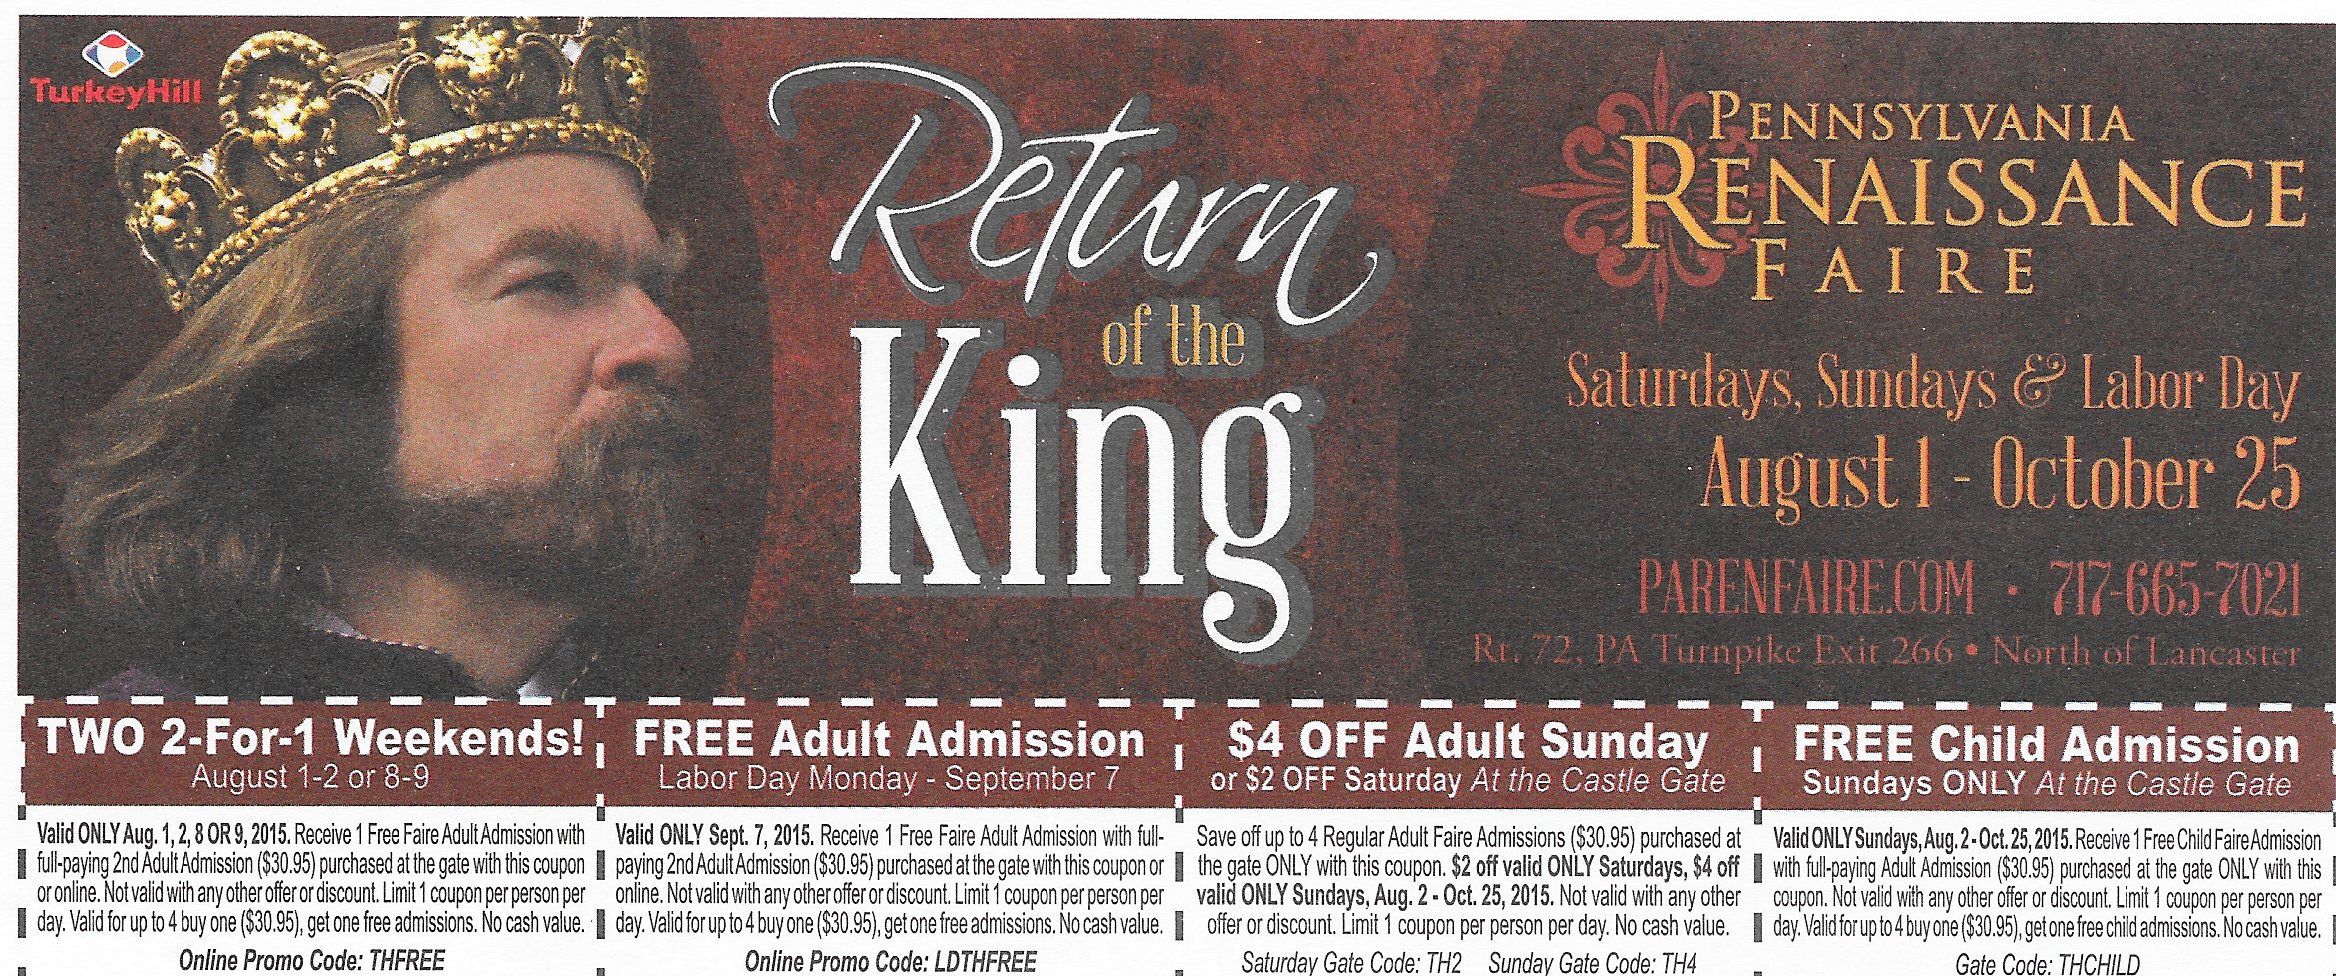 PA Renaissance Faire Save on Admission with Coupons SHIP SAVES